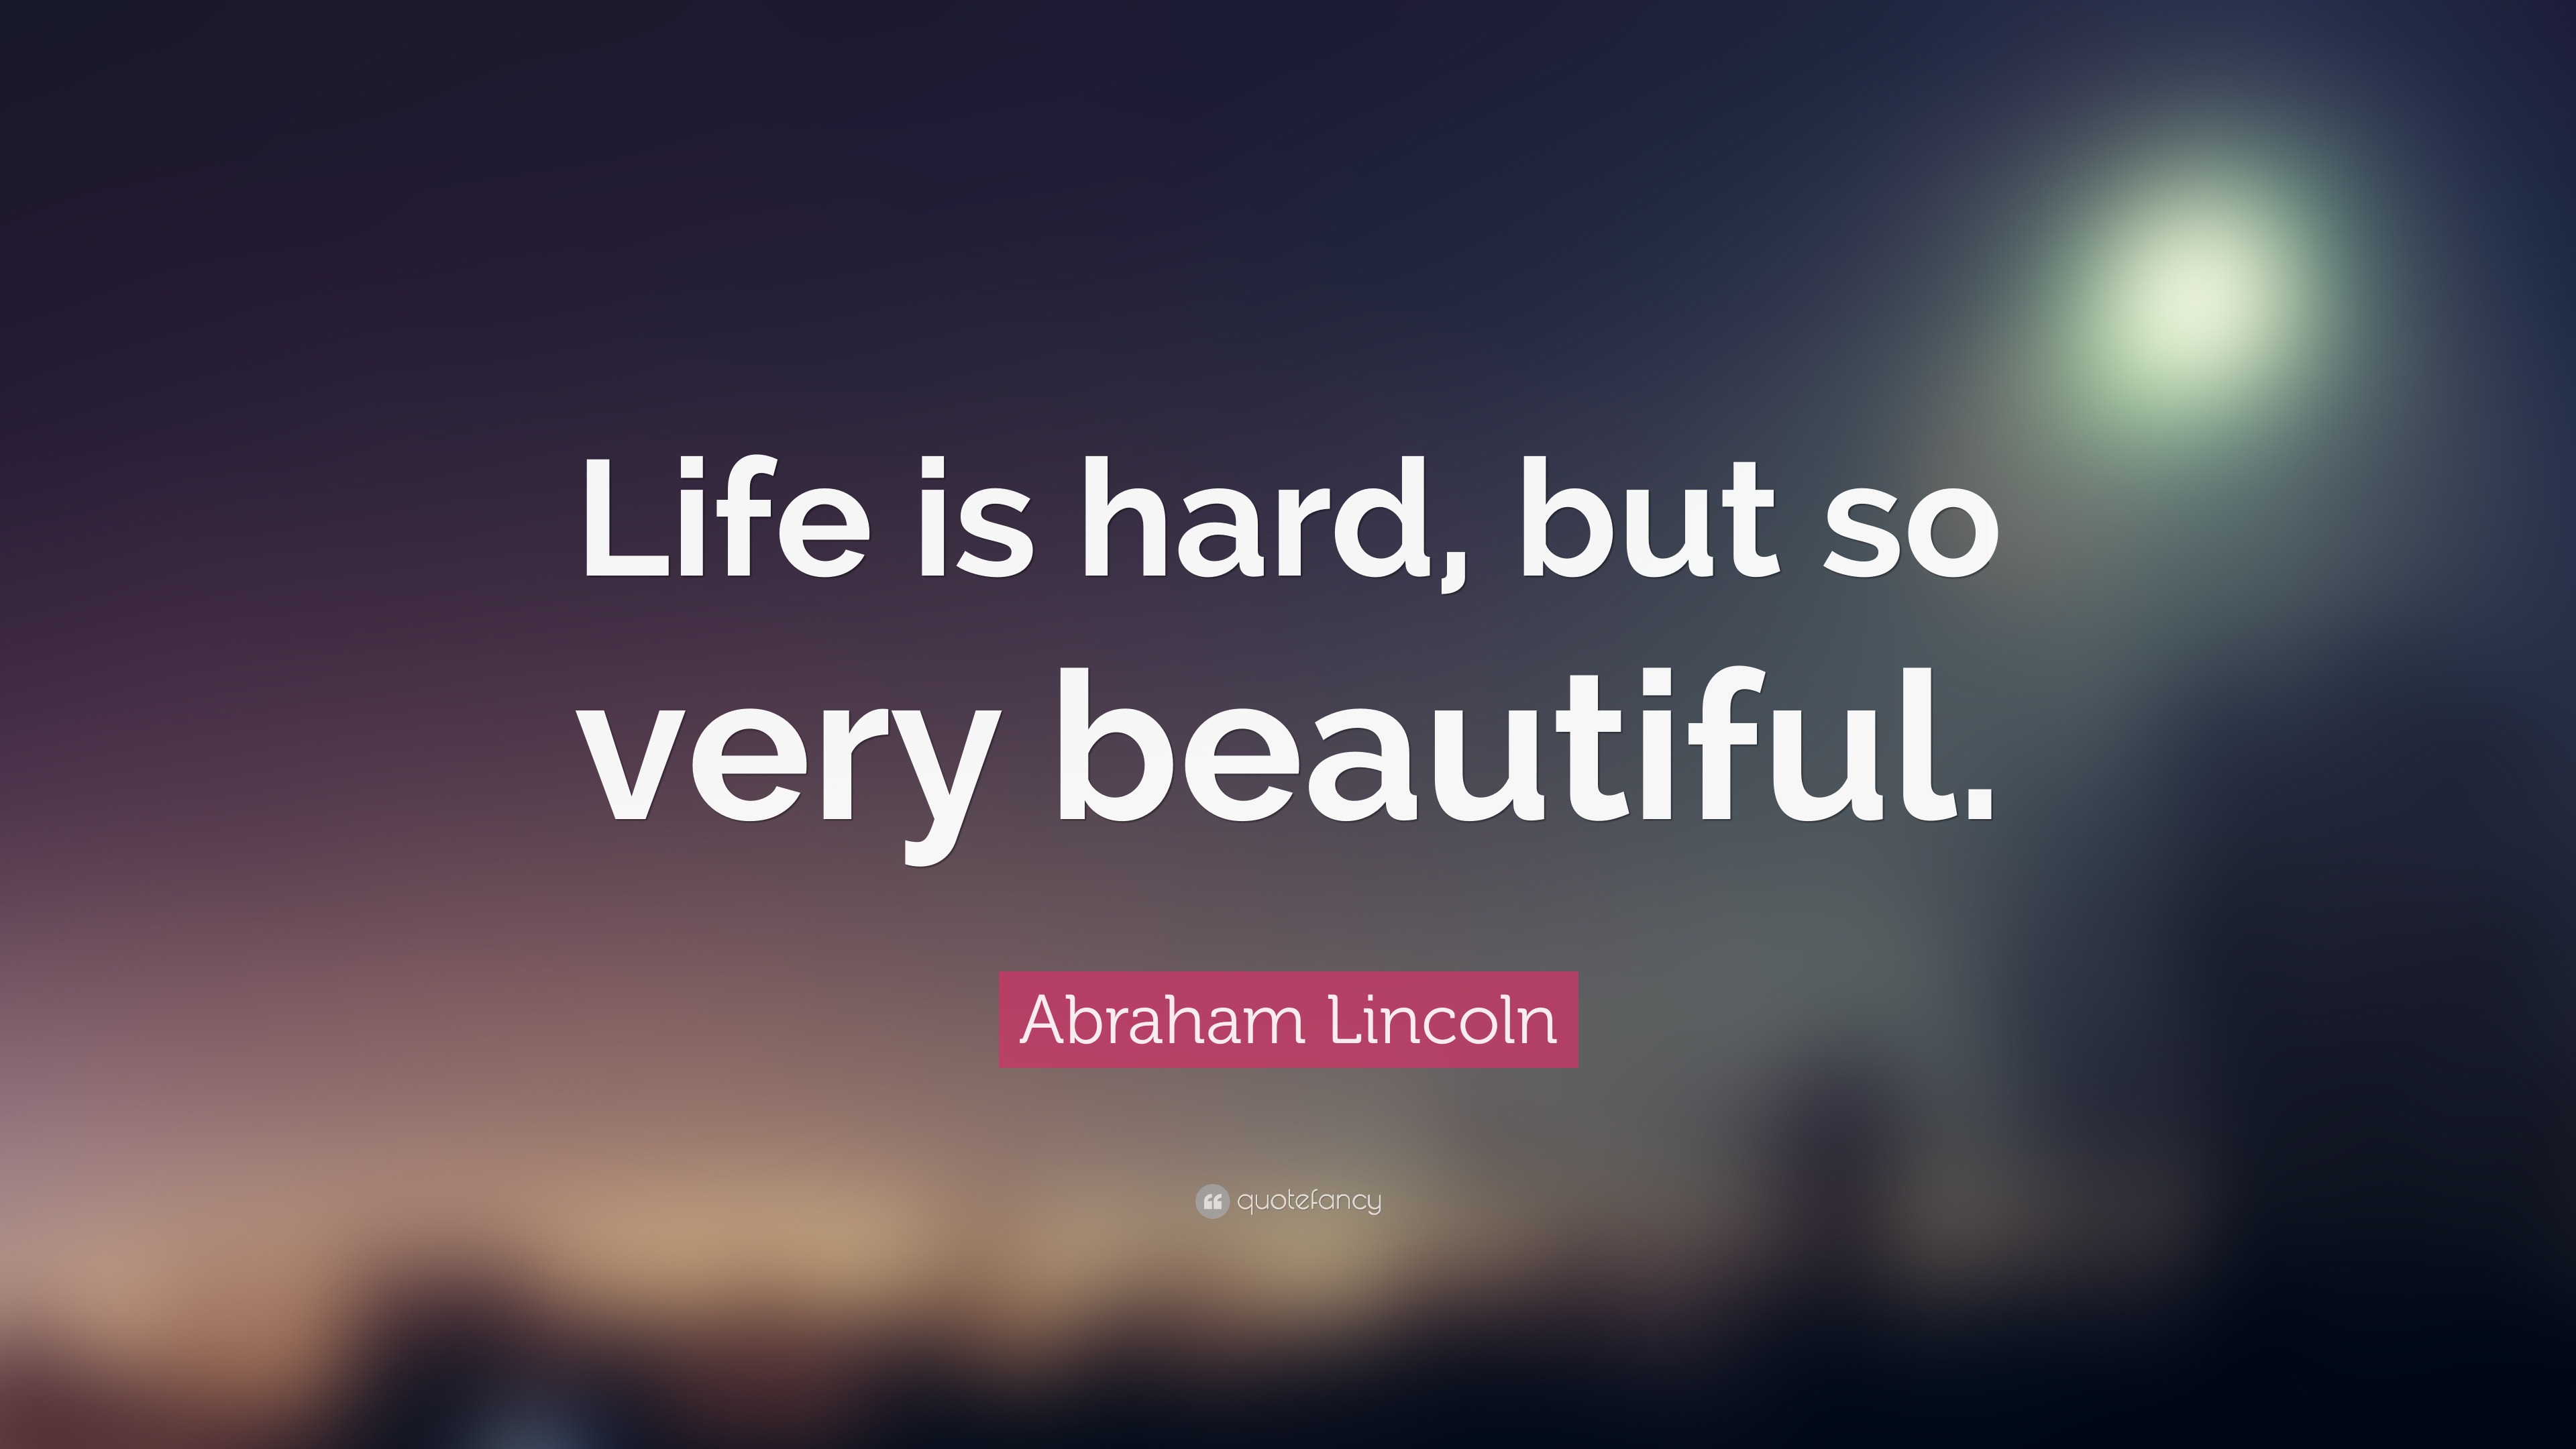 Abraham Lincoln Quote “Life is hard but so very beautiful